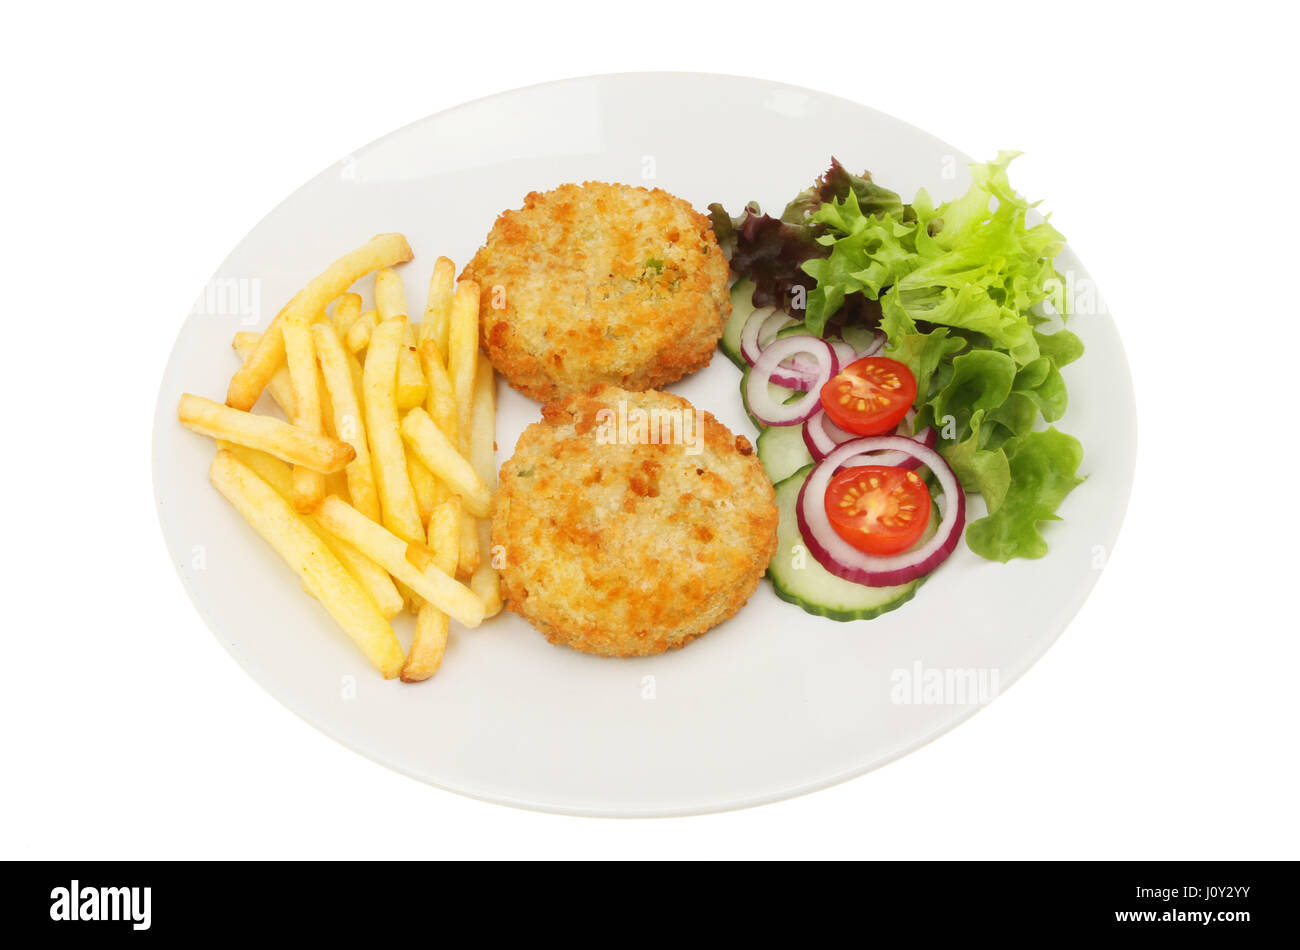 Fish cakes French fries and salad on a plate isolated against white Stock Photo